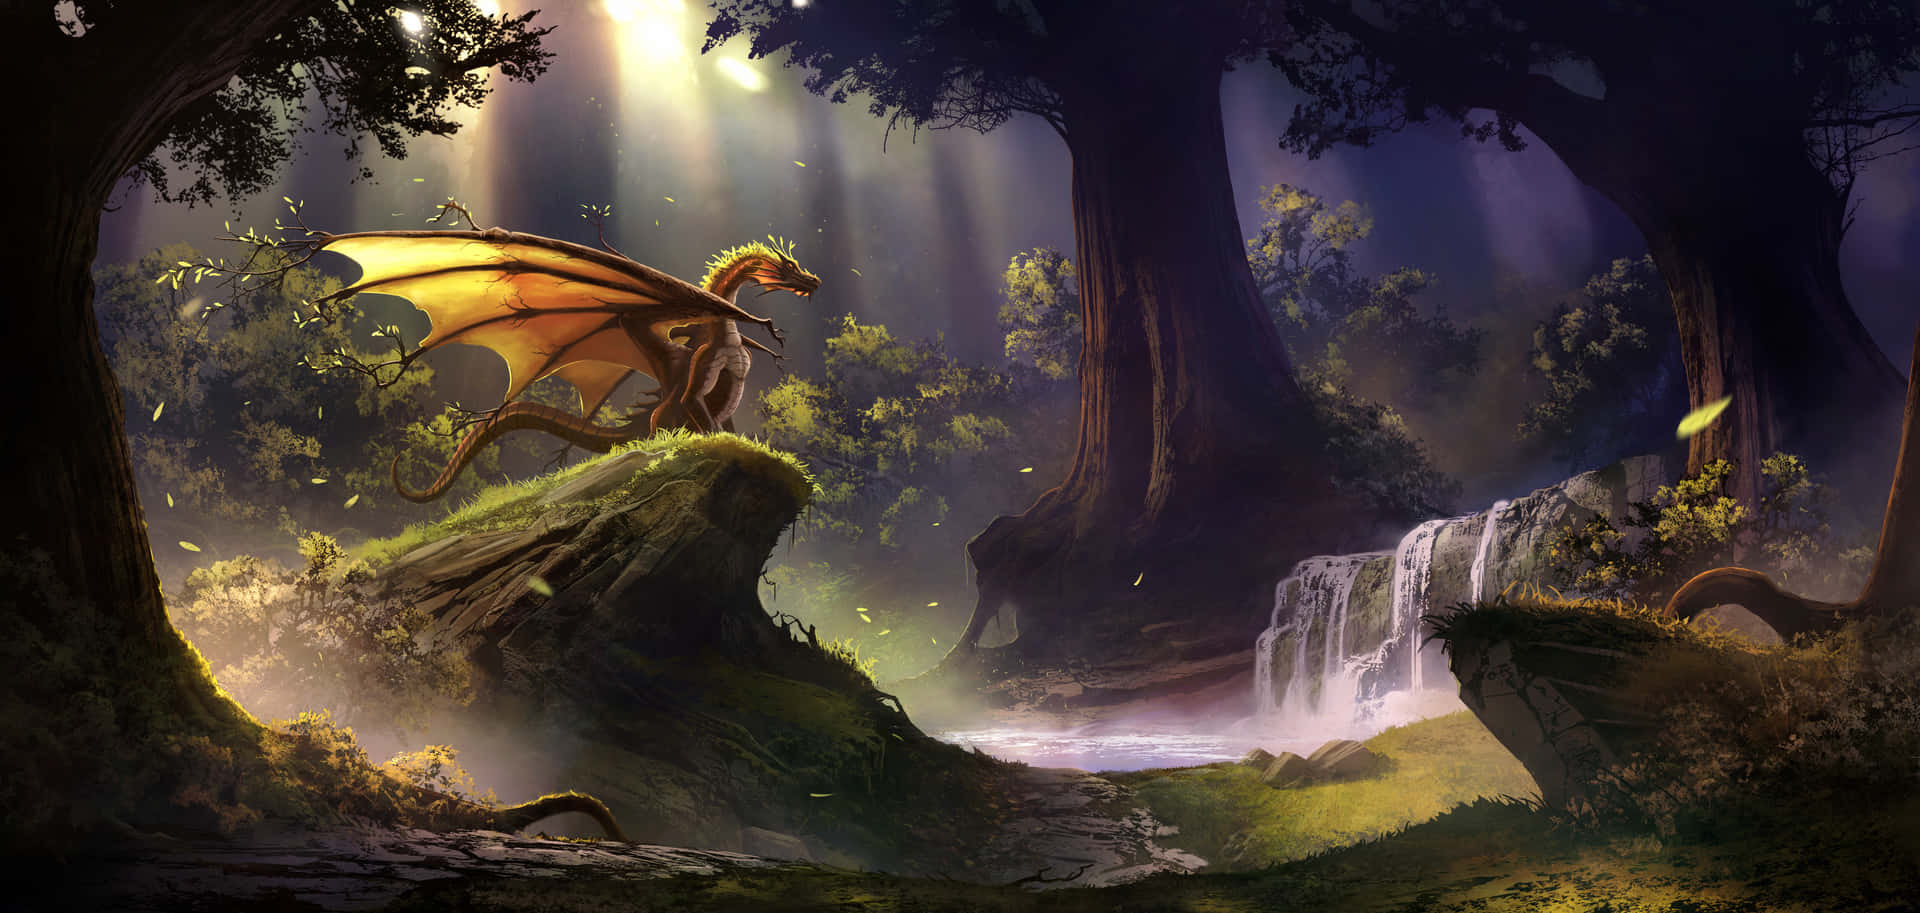 Take A Journey Into The Magical Forest. Wallpaper